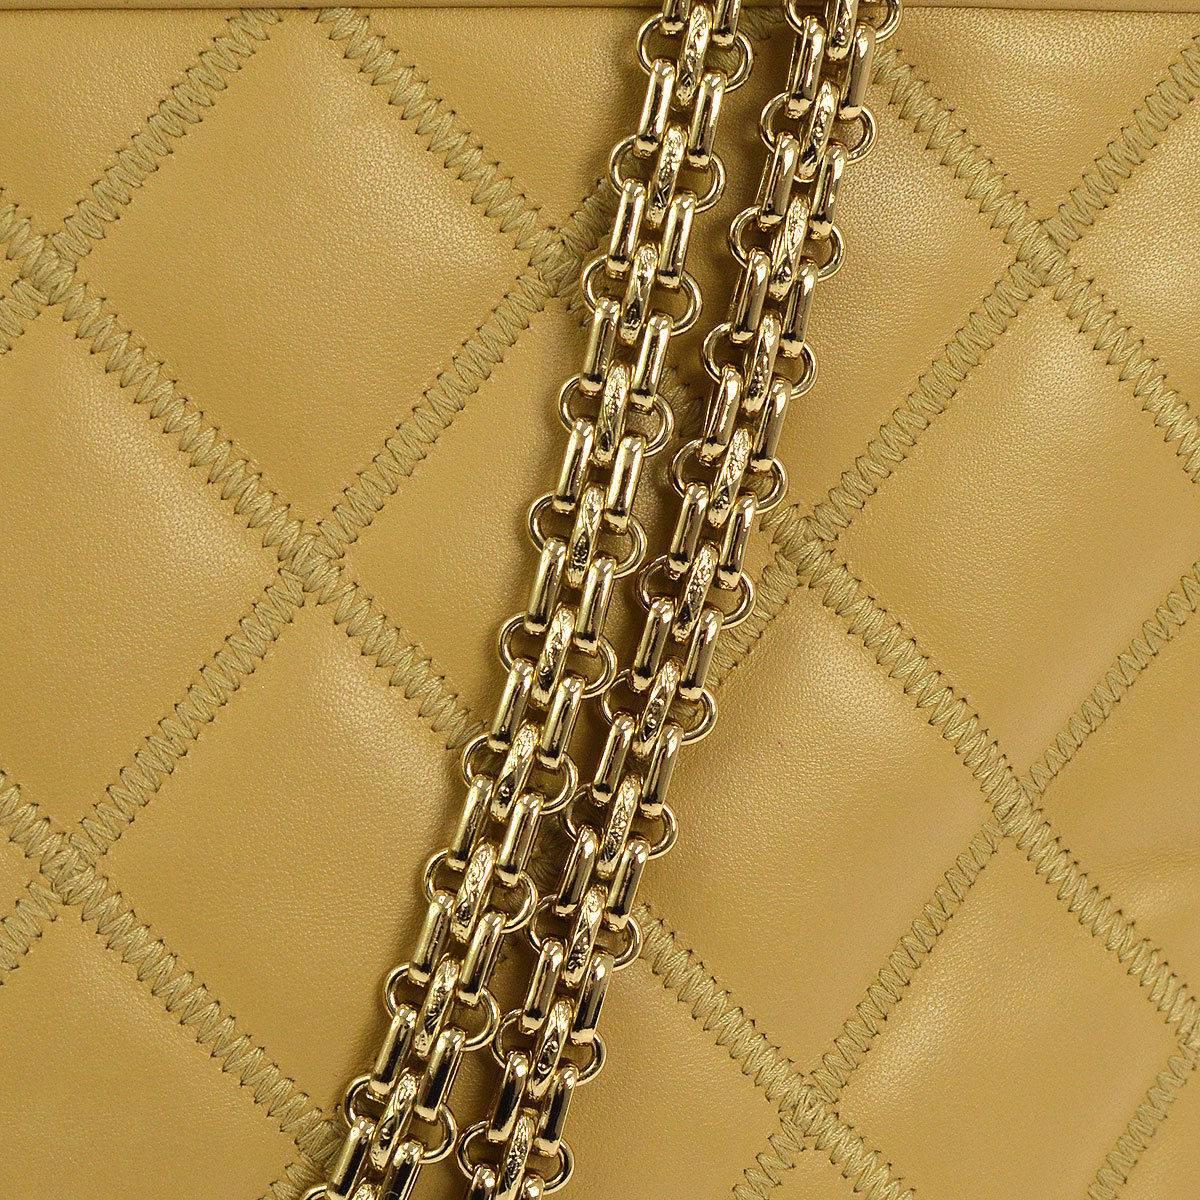 CURATOR'S NOTES

Chanel Lambskin Stitch Nude Tan Carryall Chain Top Handle Shoulder Tote Bag

Lambskin
Gold tone hardware
Woven lining
Date code present
Made in Italy
Shoulder strap drop 9"
Measures 12.5" W x 10" H x 4.25" D  